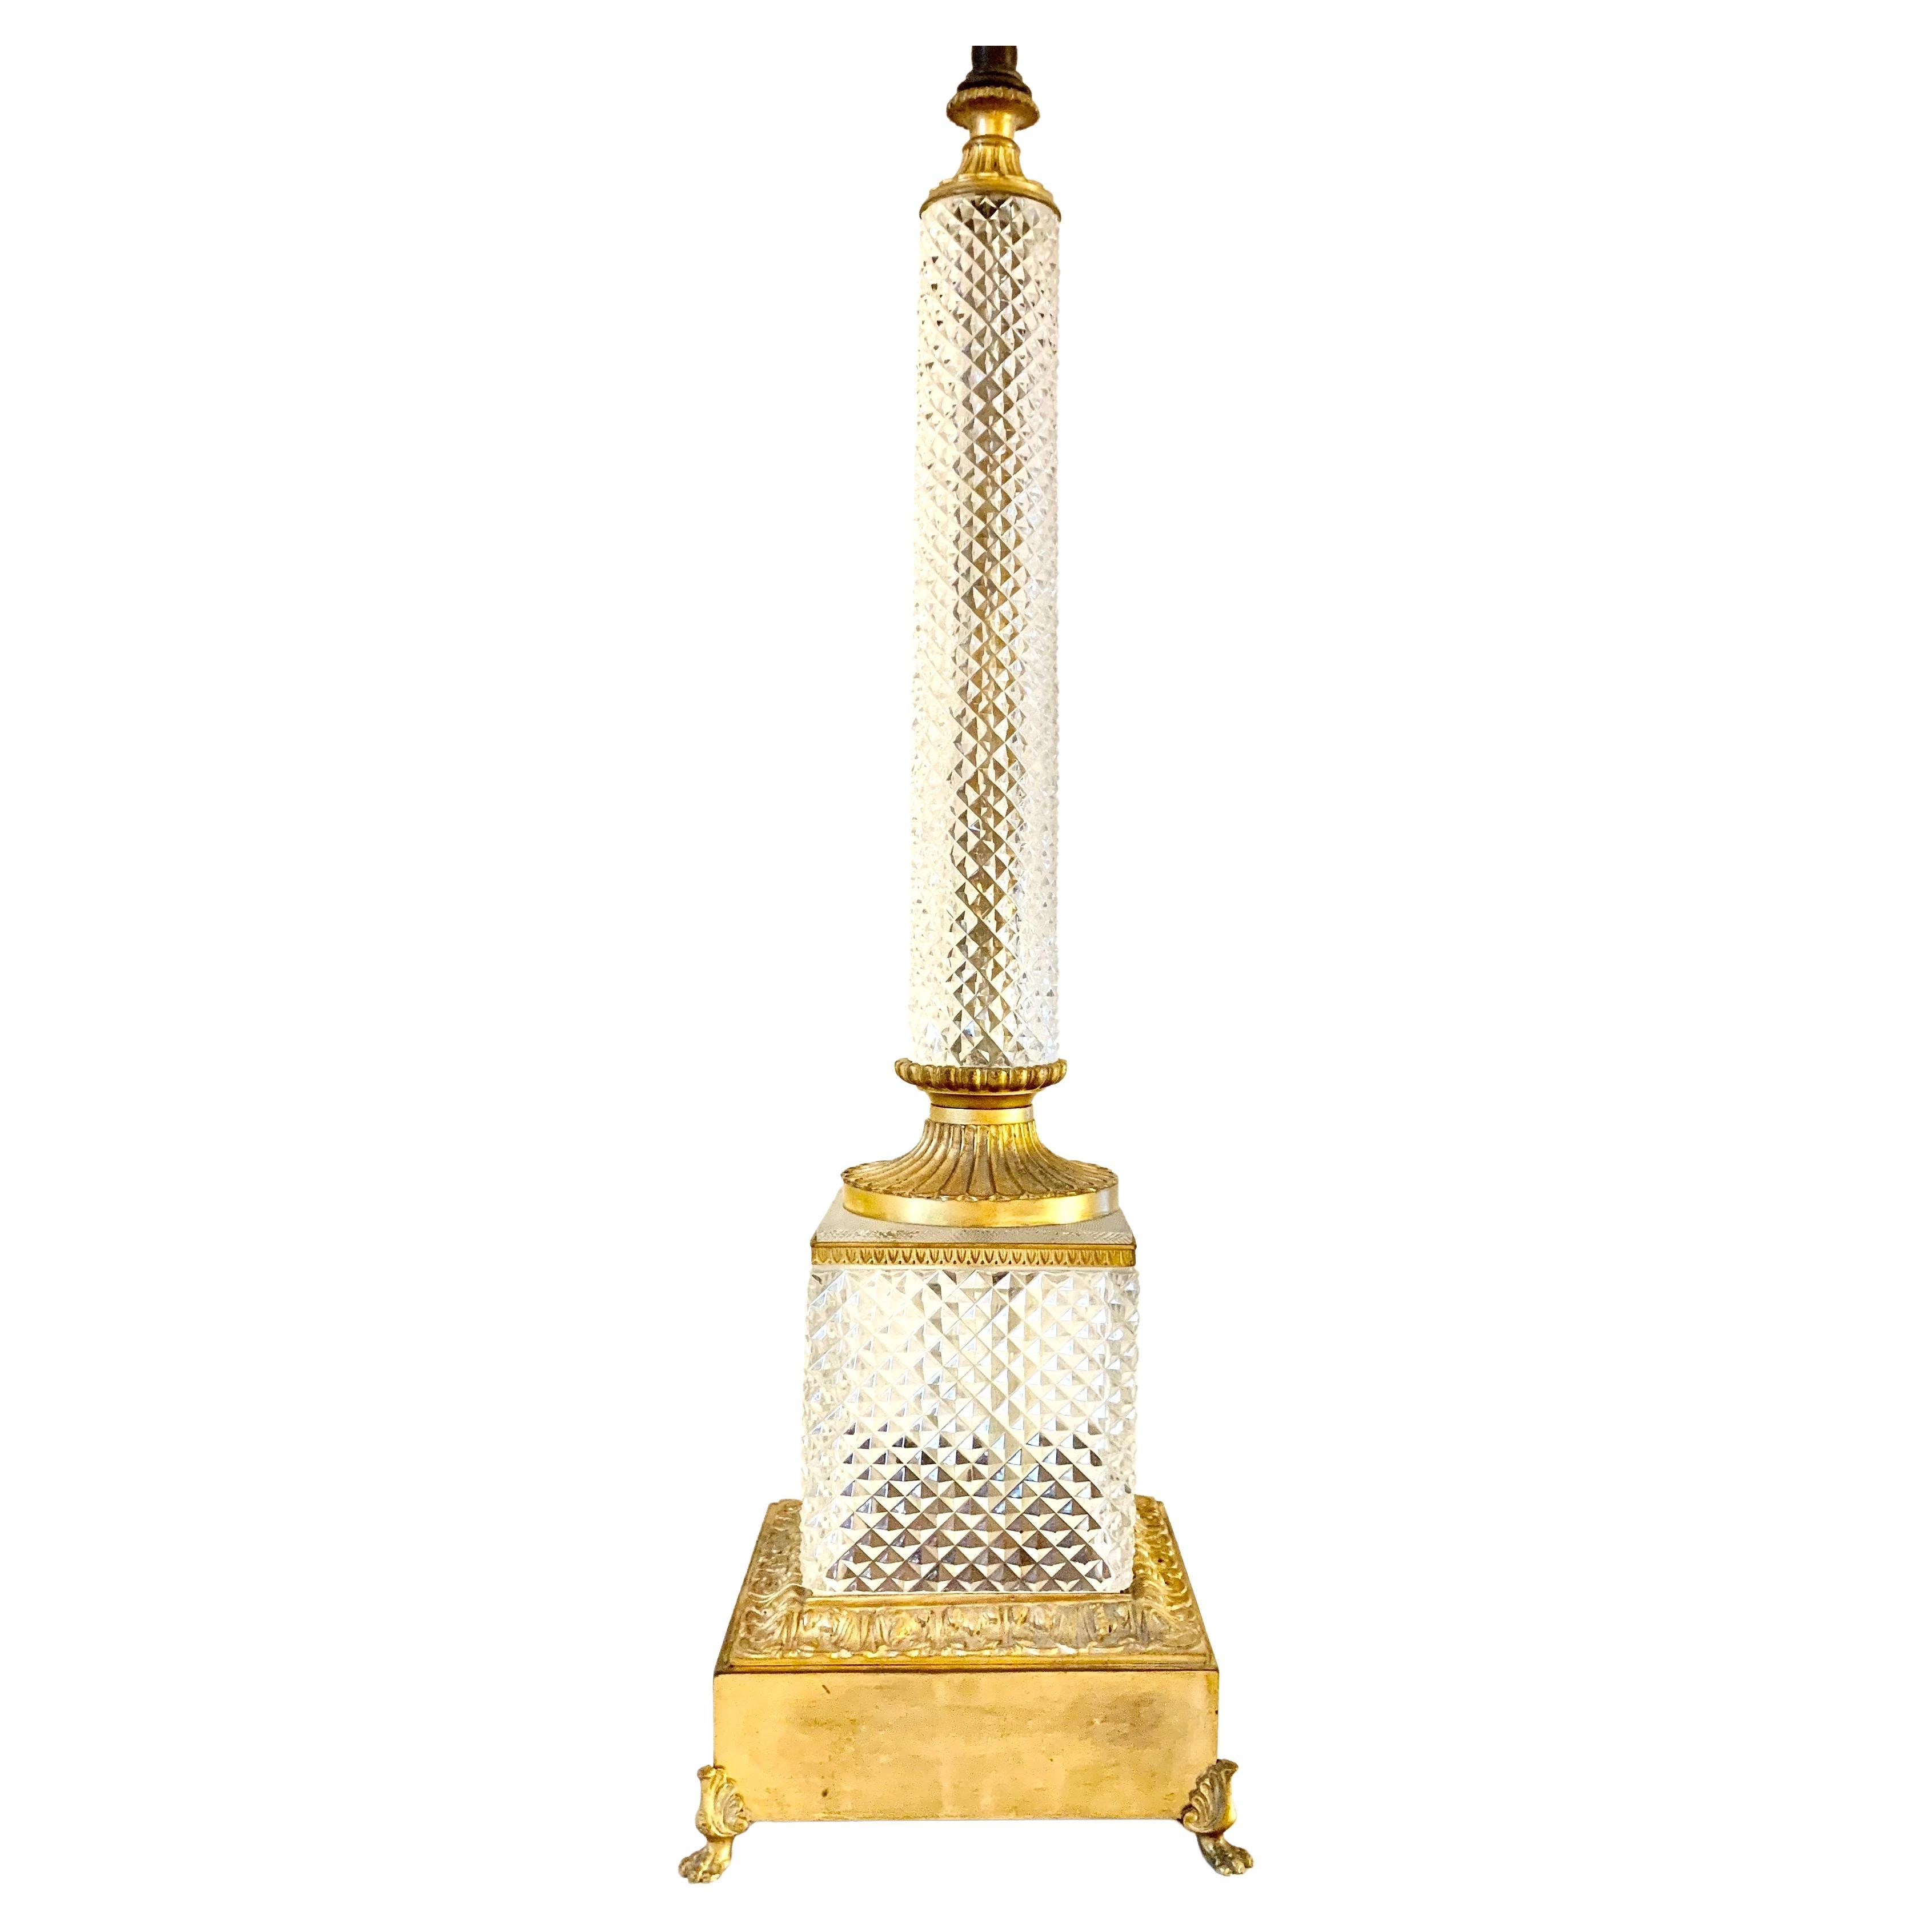 Palace Size Antique Neoclassical Style Gilt Bronze Cut Crystal Column Table Lamp For Sale